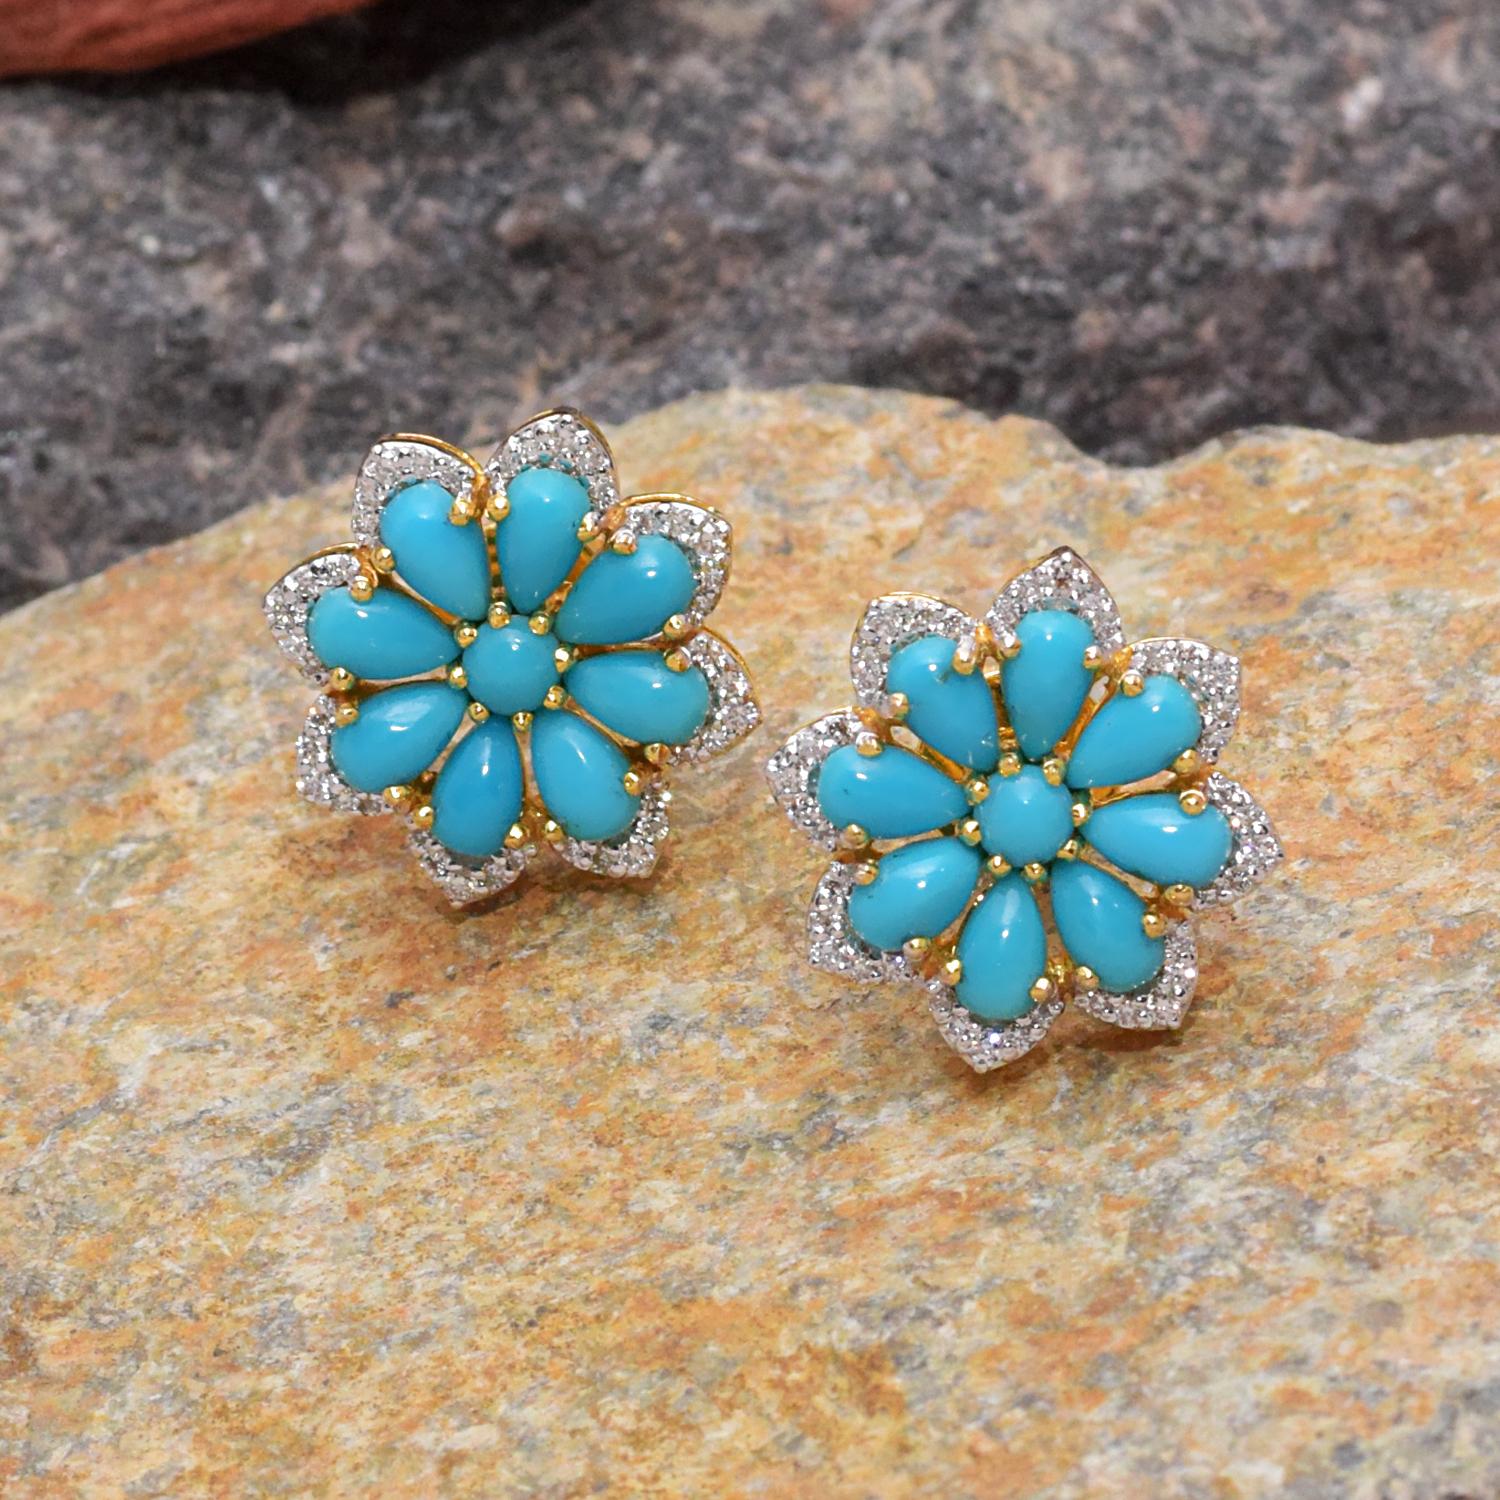 Turquoise Stud Earrings with Diamond in 14k Gold In New Condition For Sale In jaipur, IN